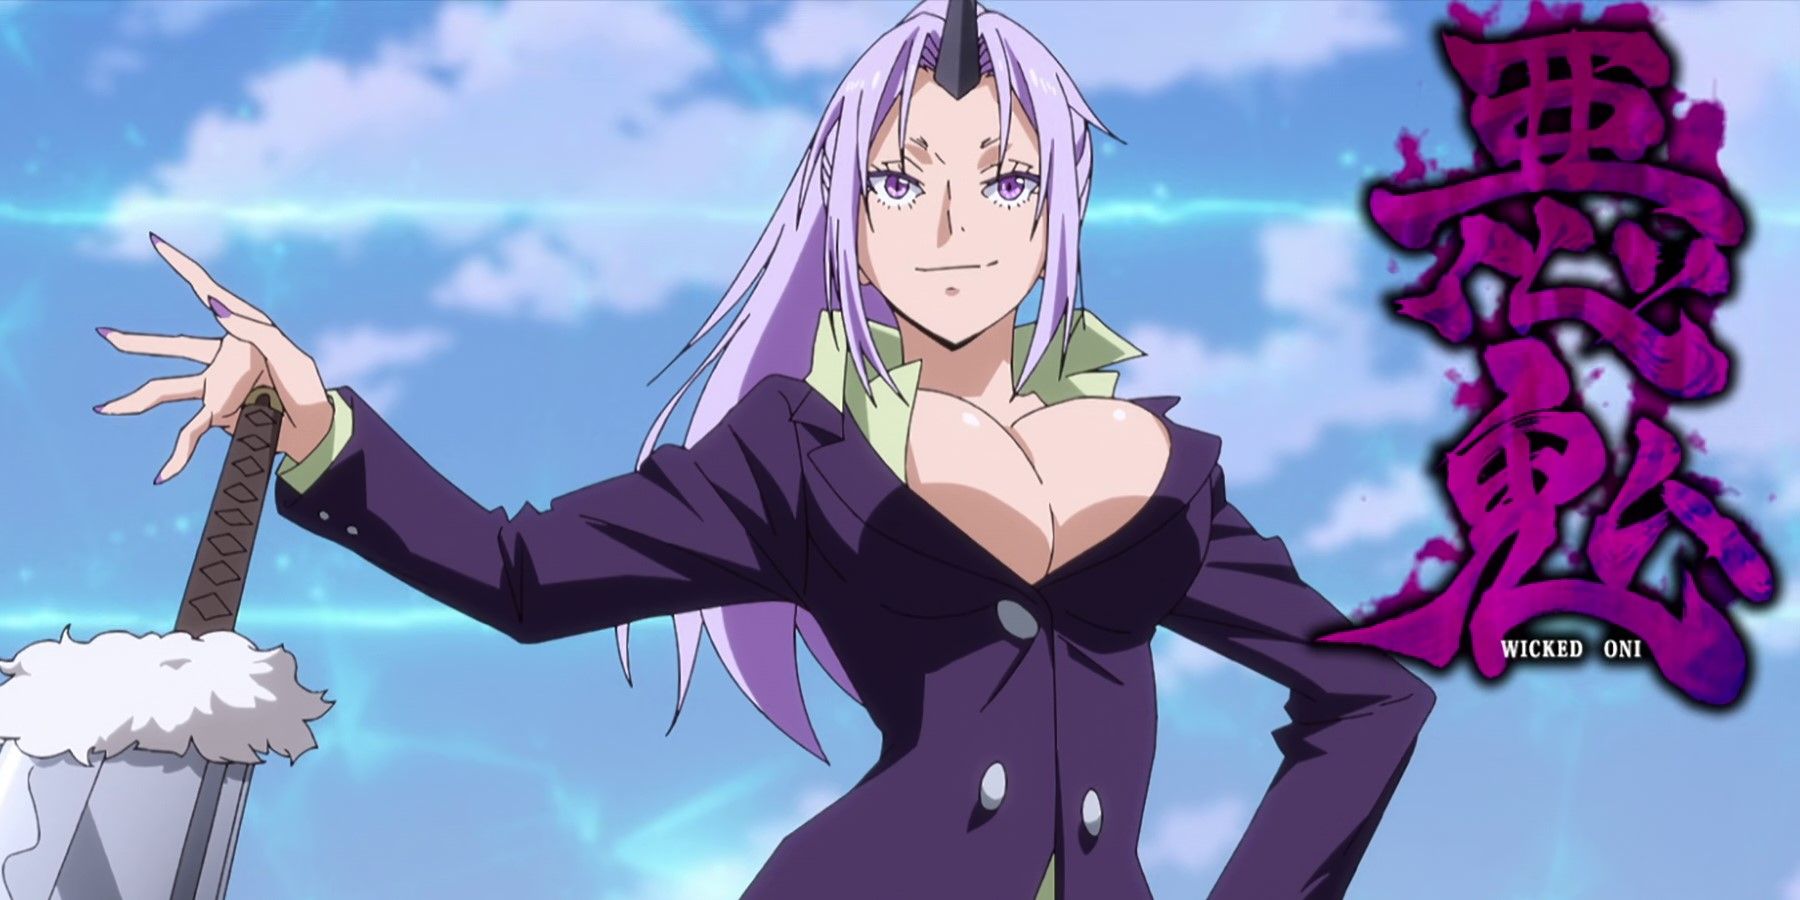 Shion The Wicked Oni – That Time I Got Reincarnated As A Slime Season 3 Episode 8